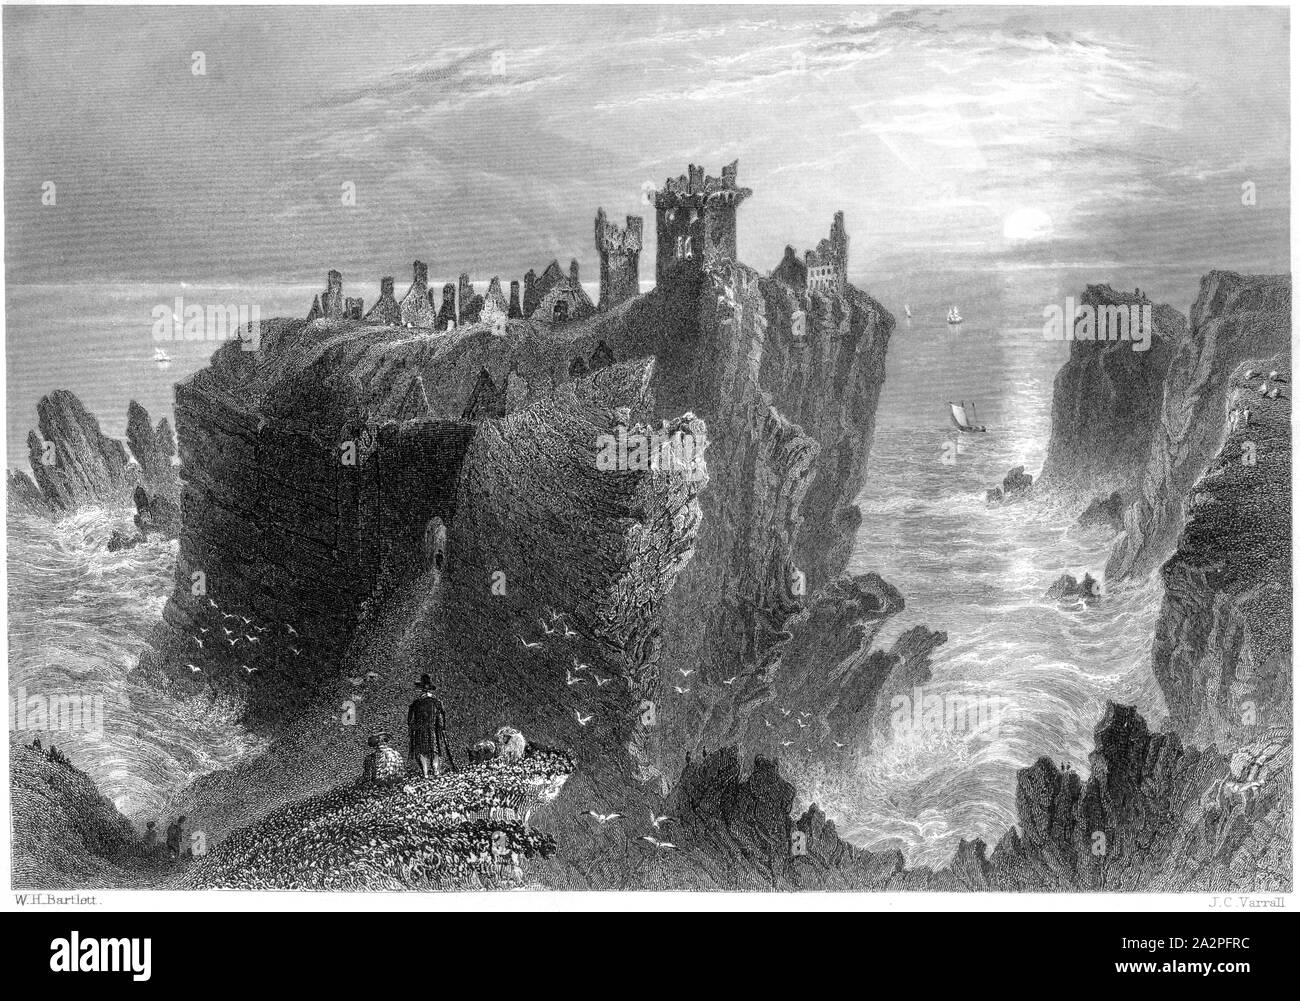 An engraving of Dunottar (Dunnottar) Castle near Stonehaven scanned at high resolution from a book printed in 1842.  Believed copyright free. Stock Photo